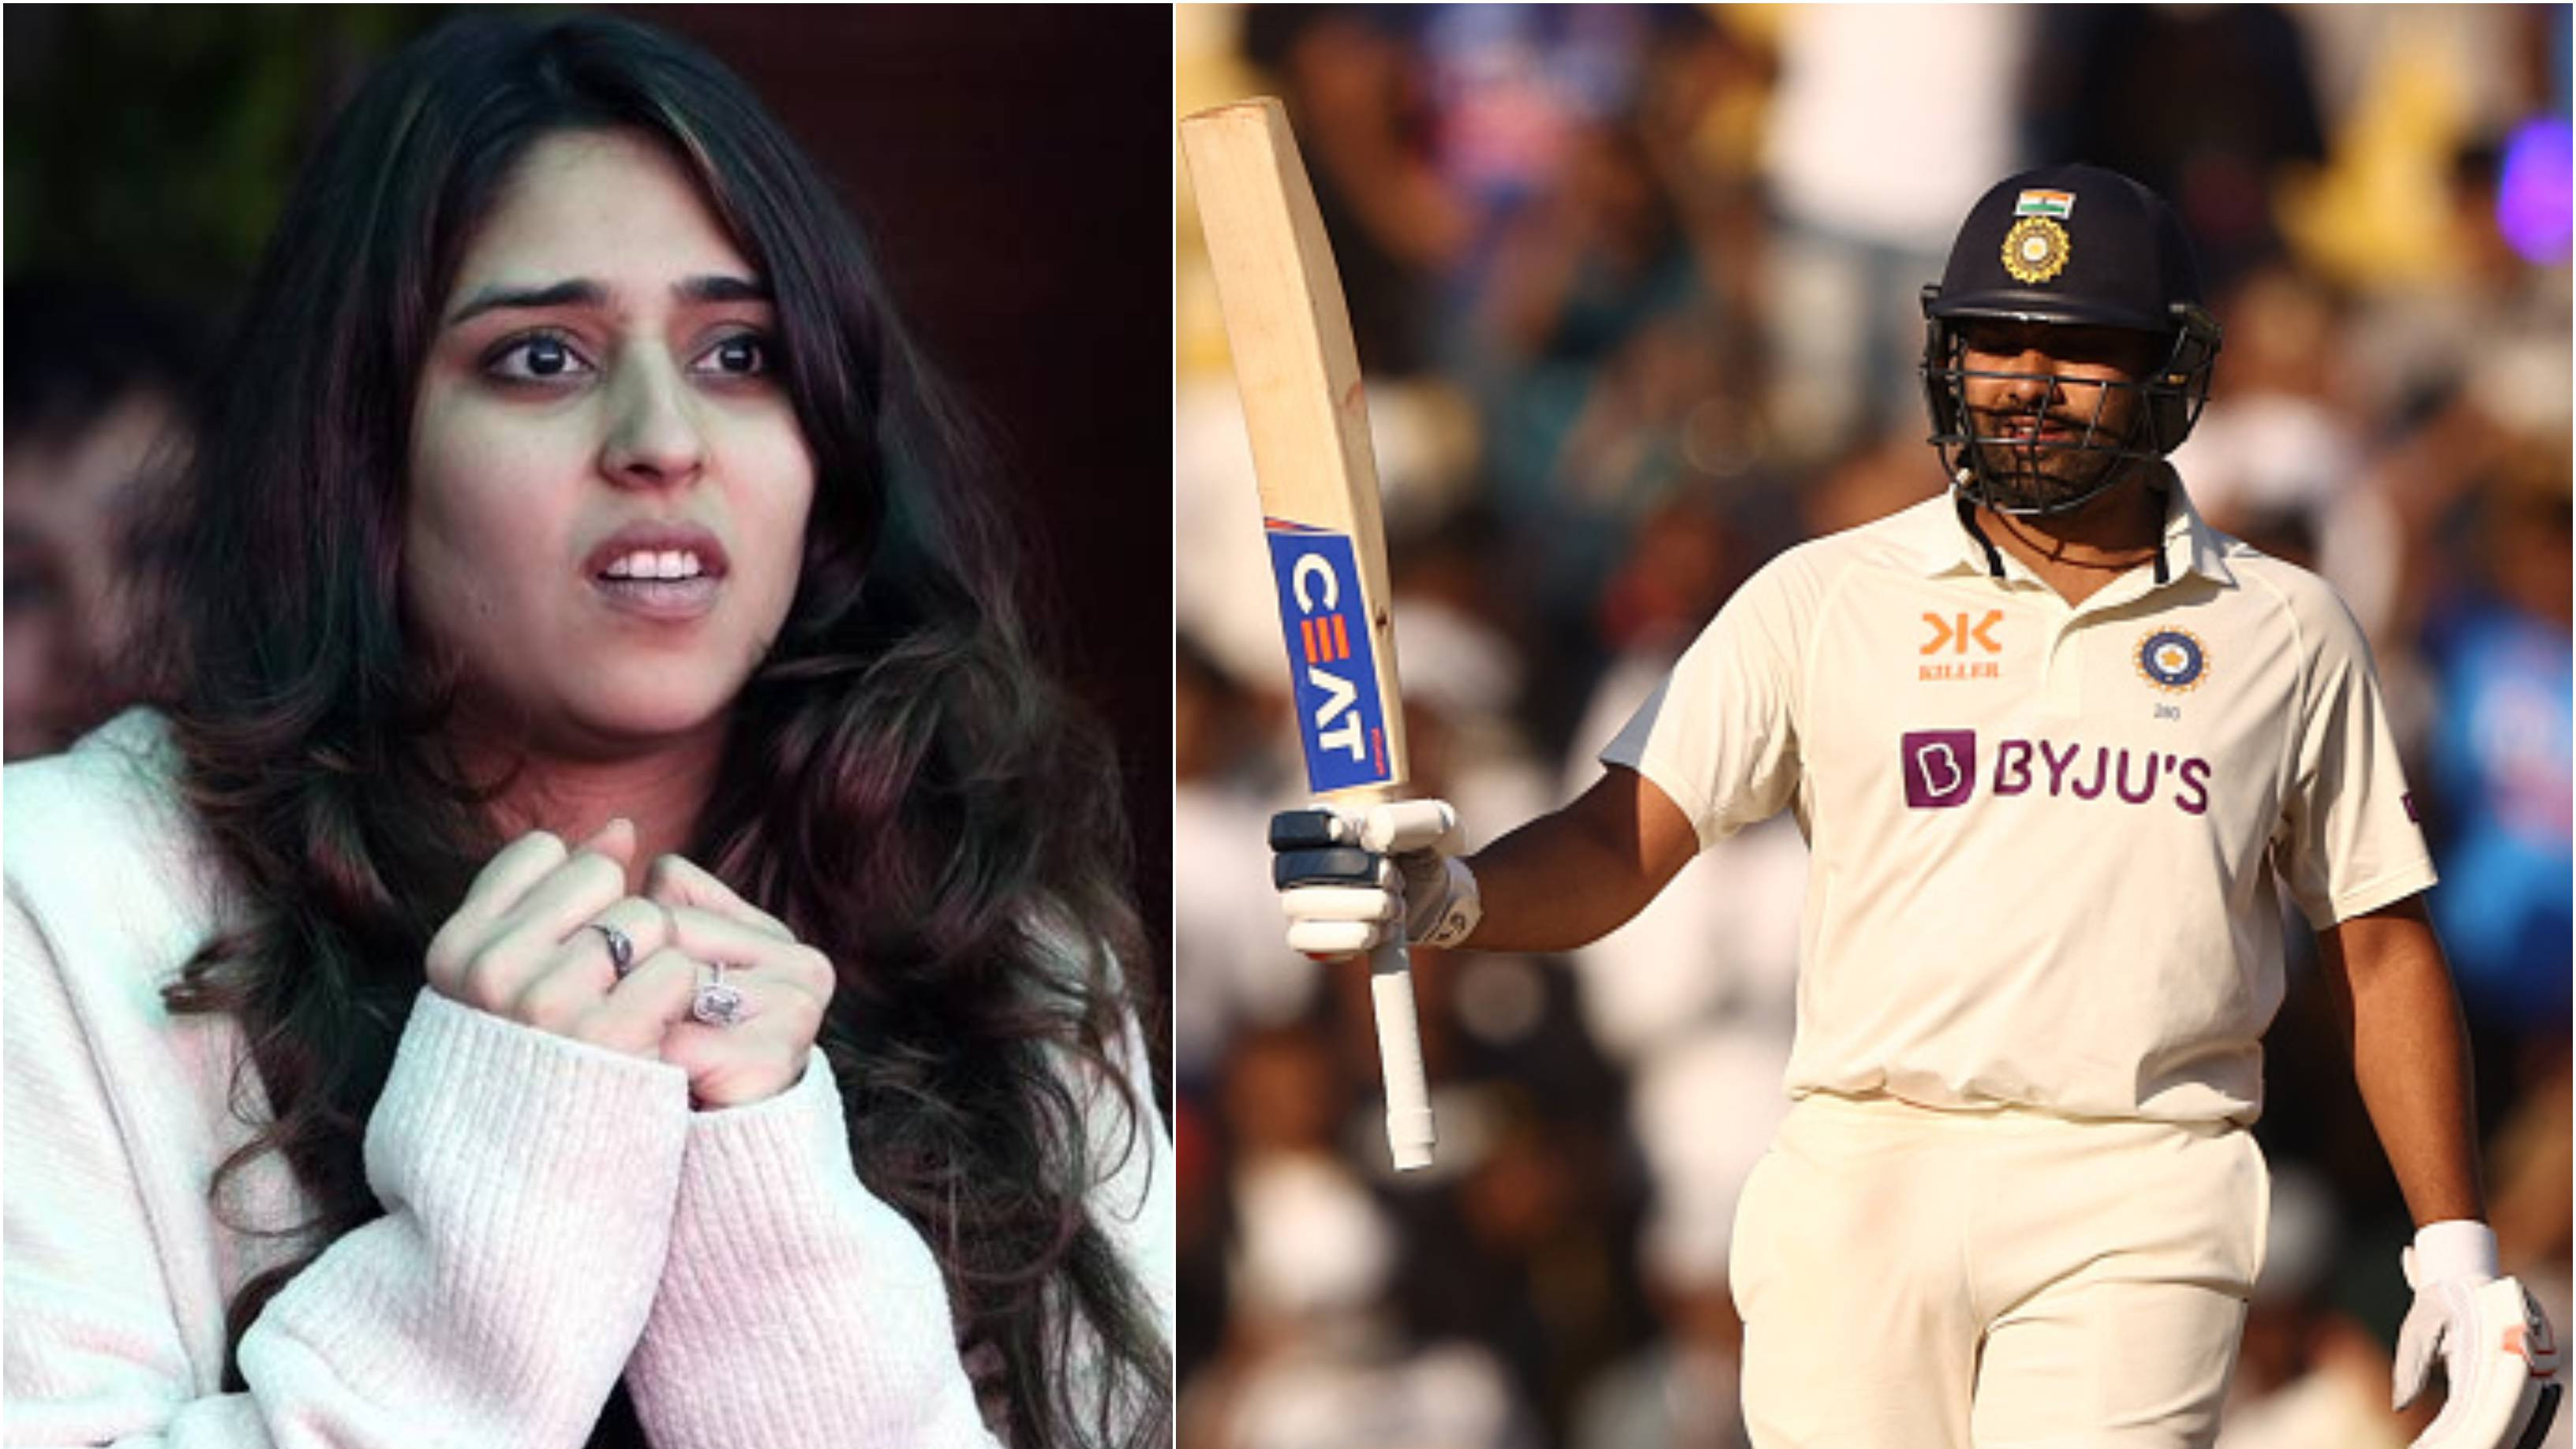 IND v AUS 2023: “Send replacement fingers…” Ritika’s message for husband Rohit after he slams maiden Test ton as captain